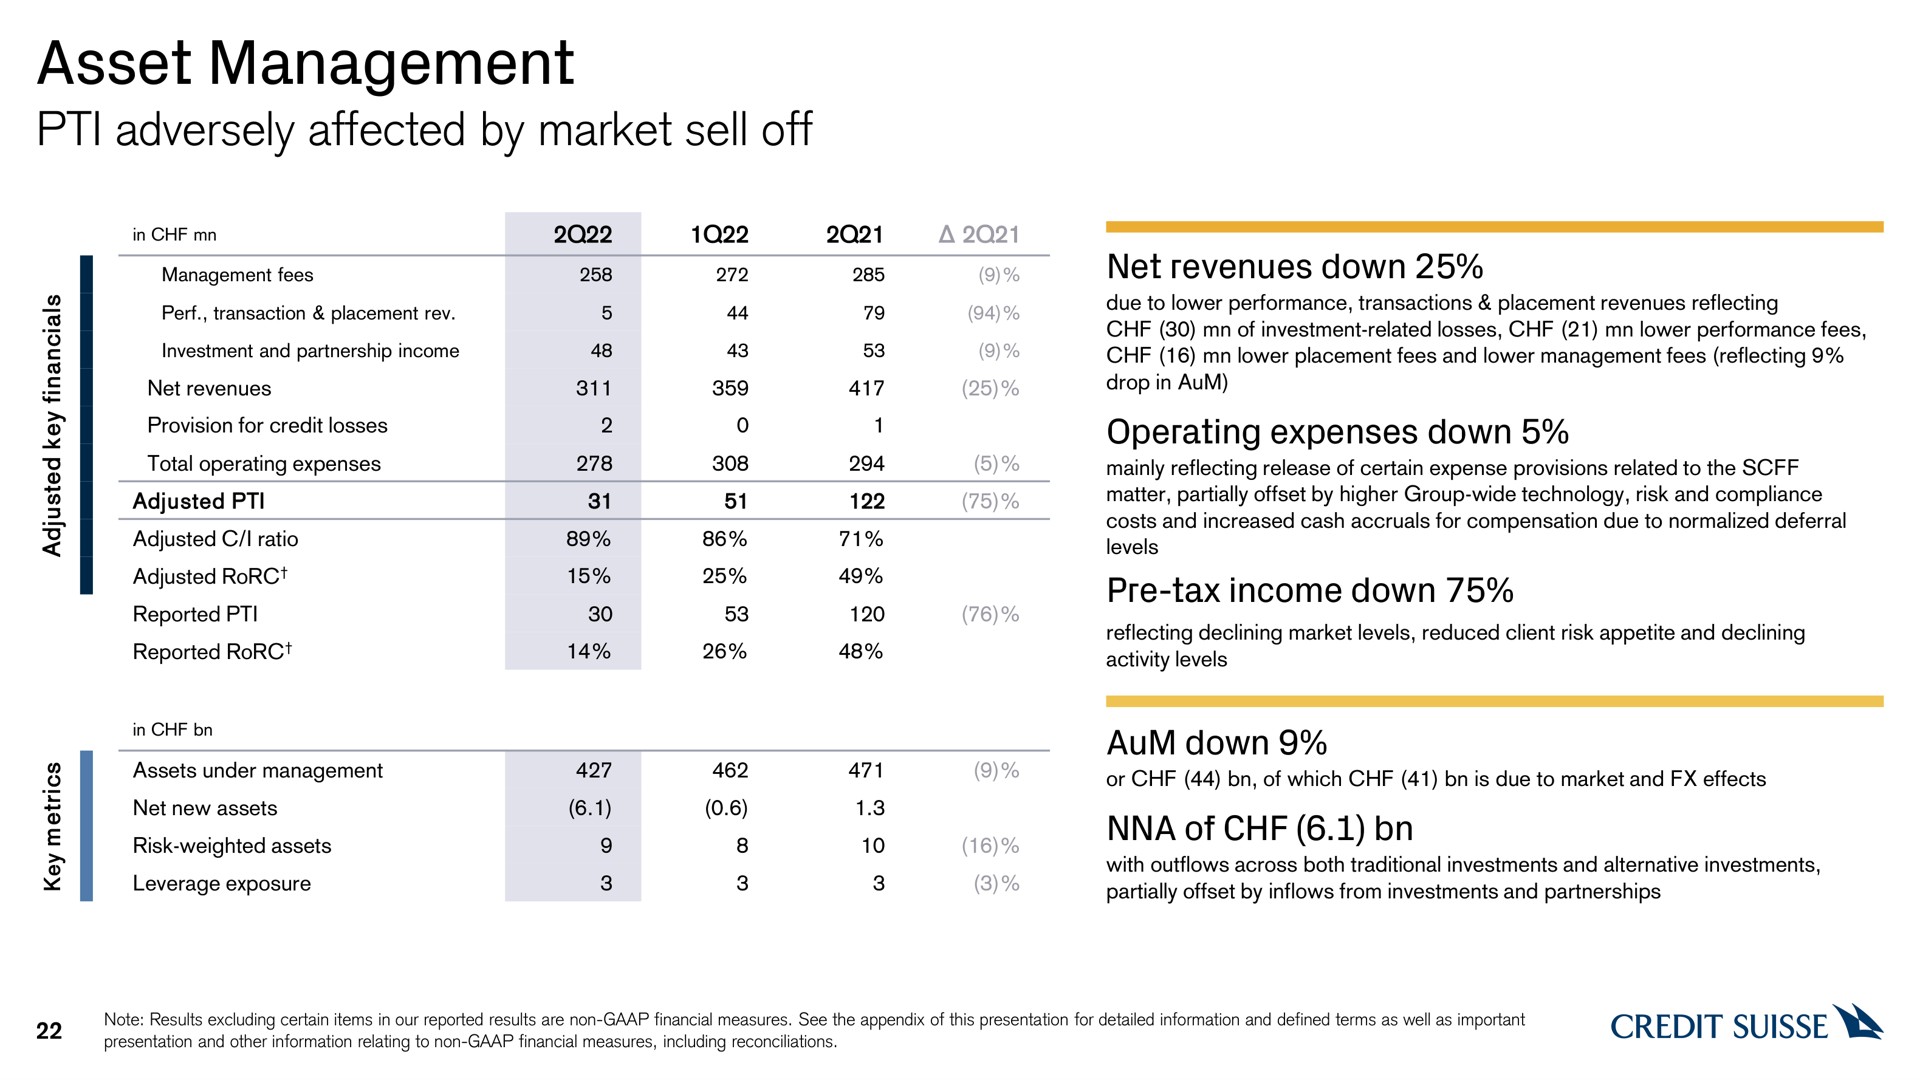 asset management adversely affected by market sell off tax income down | Credit Suisse